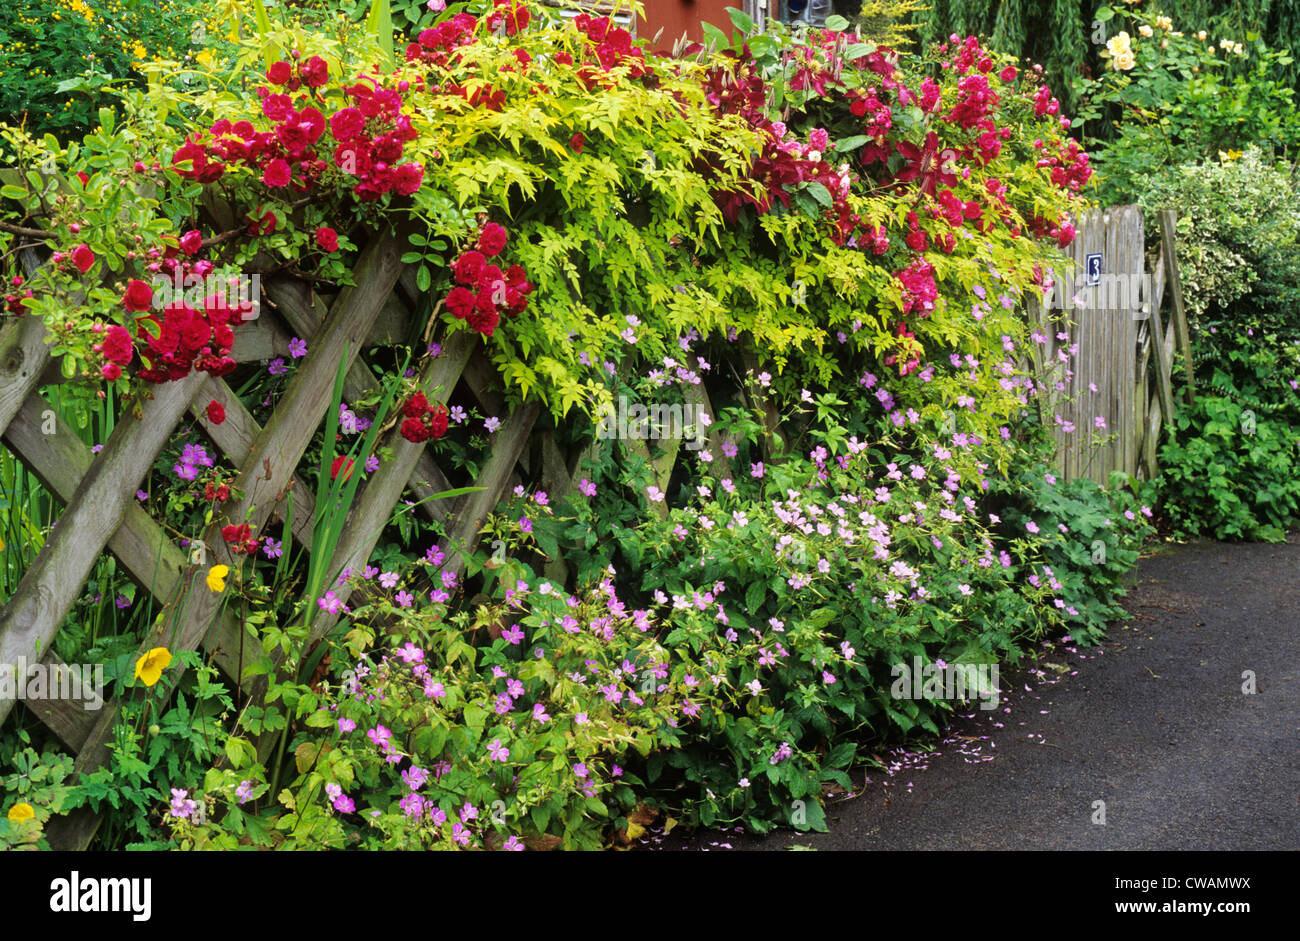 Trellis with climbing roses, front garden picket fence red rose climbing climbers pink purple flower flowers gardens plant Stock Photo